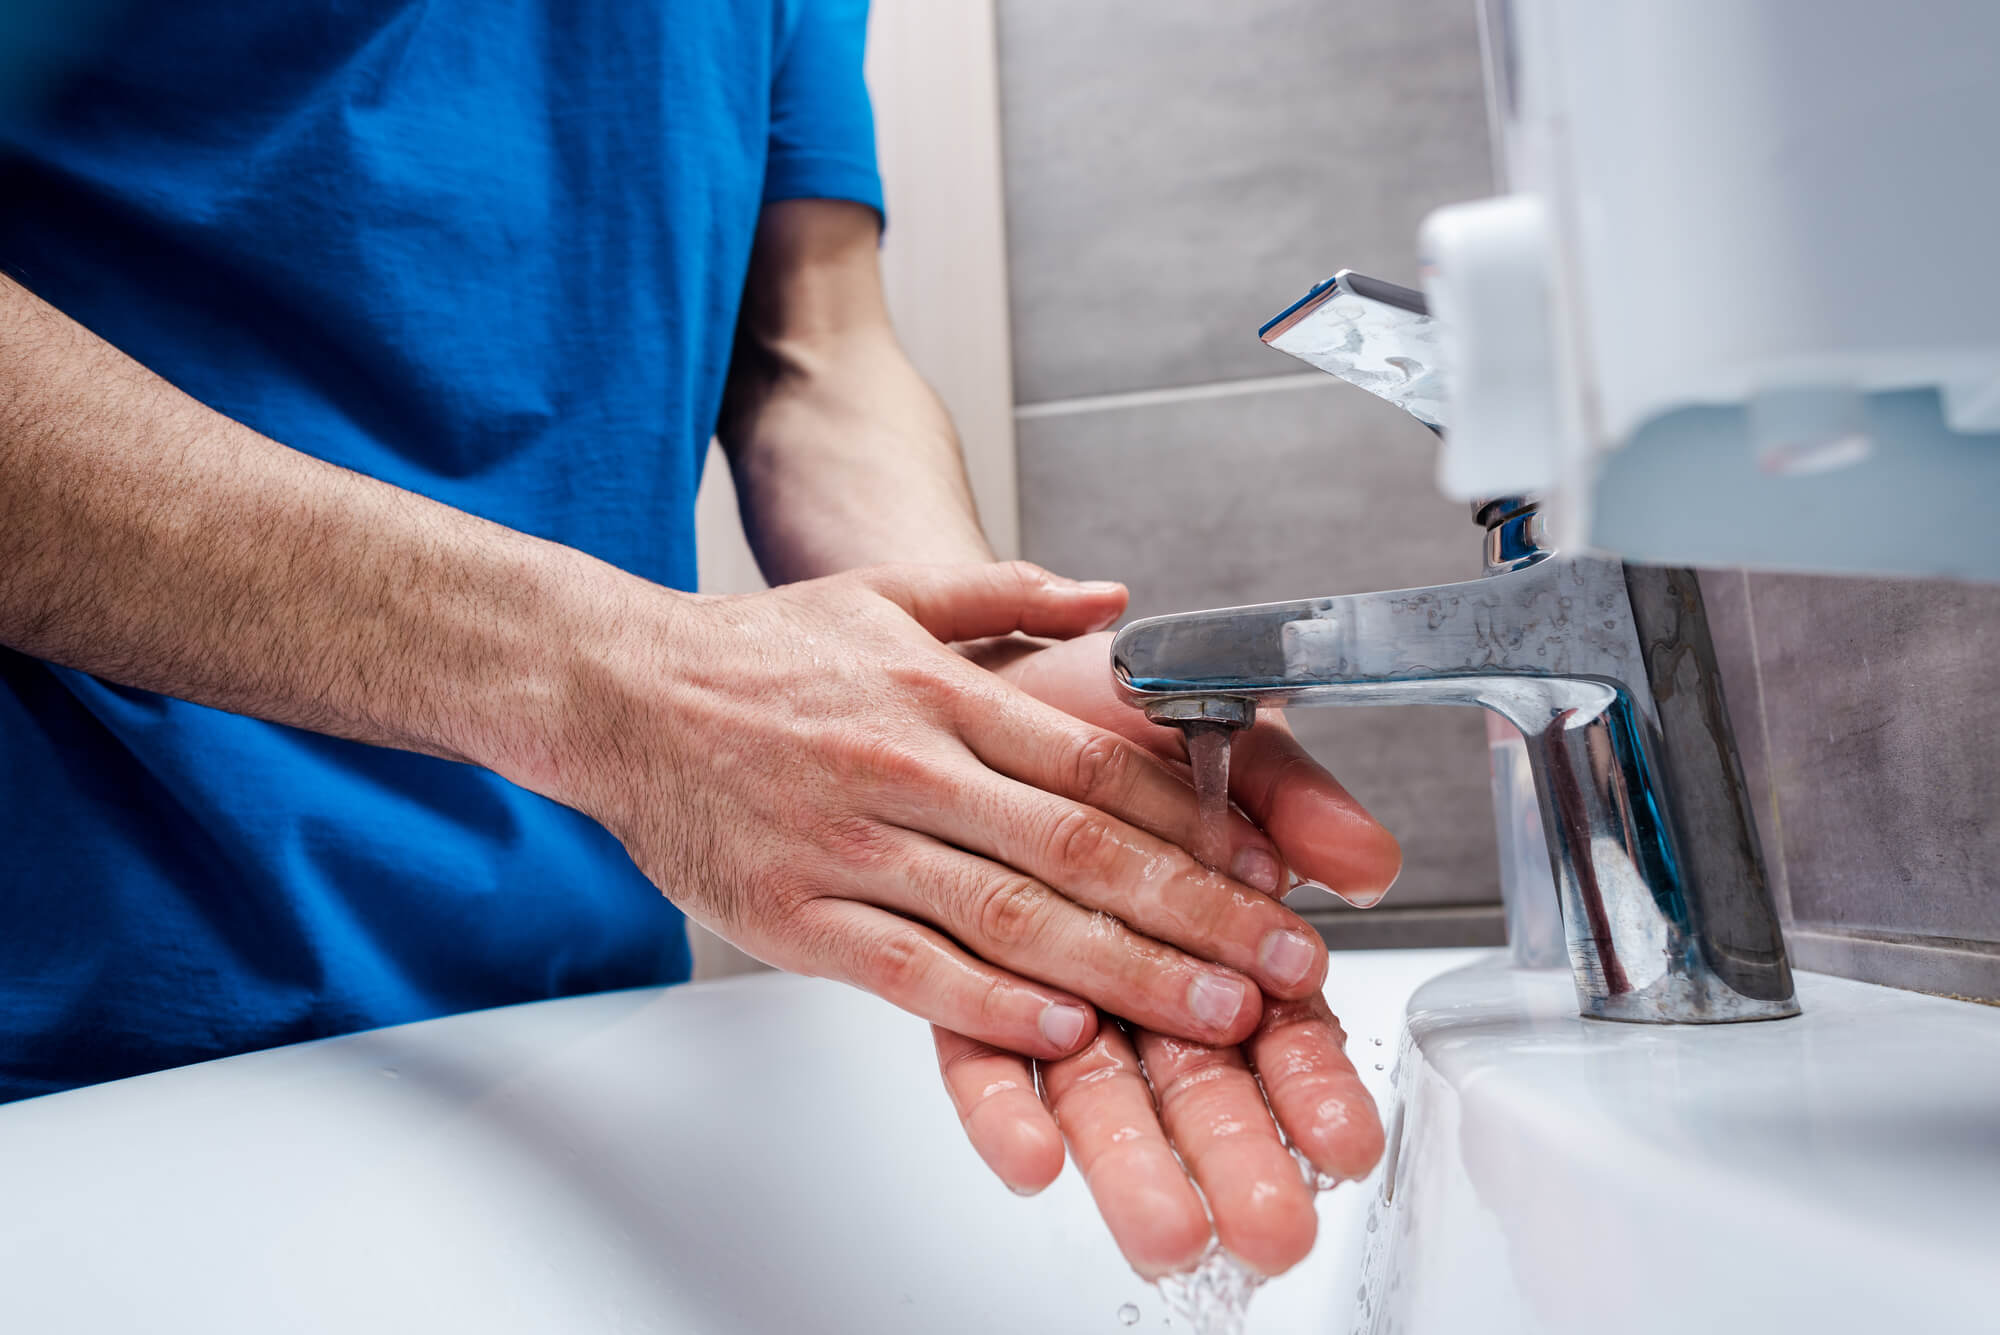 Health and Hygiene Tips For The Healthcare Worker